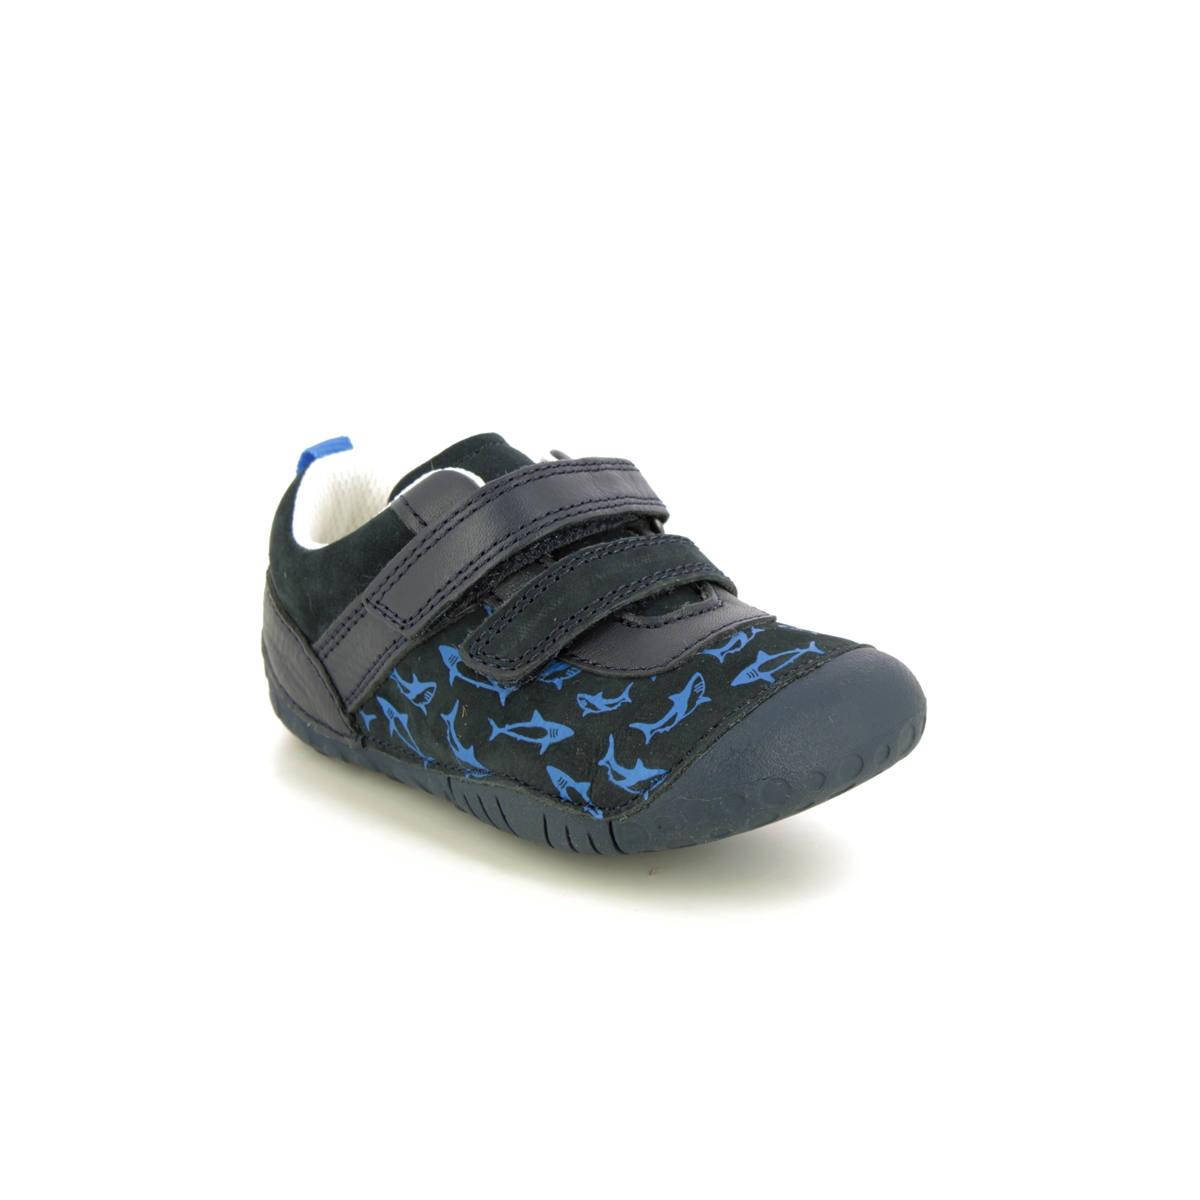 Start Rite - Little Fin In Navy Leather 0777-97G In Size 5 In Plain Navy Leather Boys First And Toddler Shoes  In Navy Leather For kids